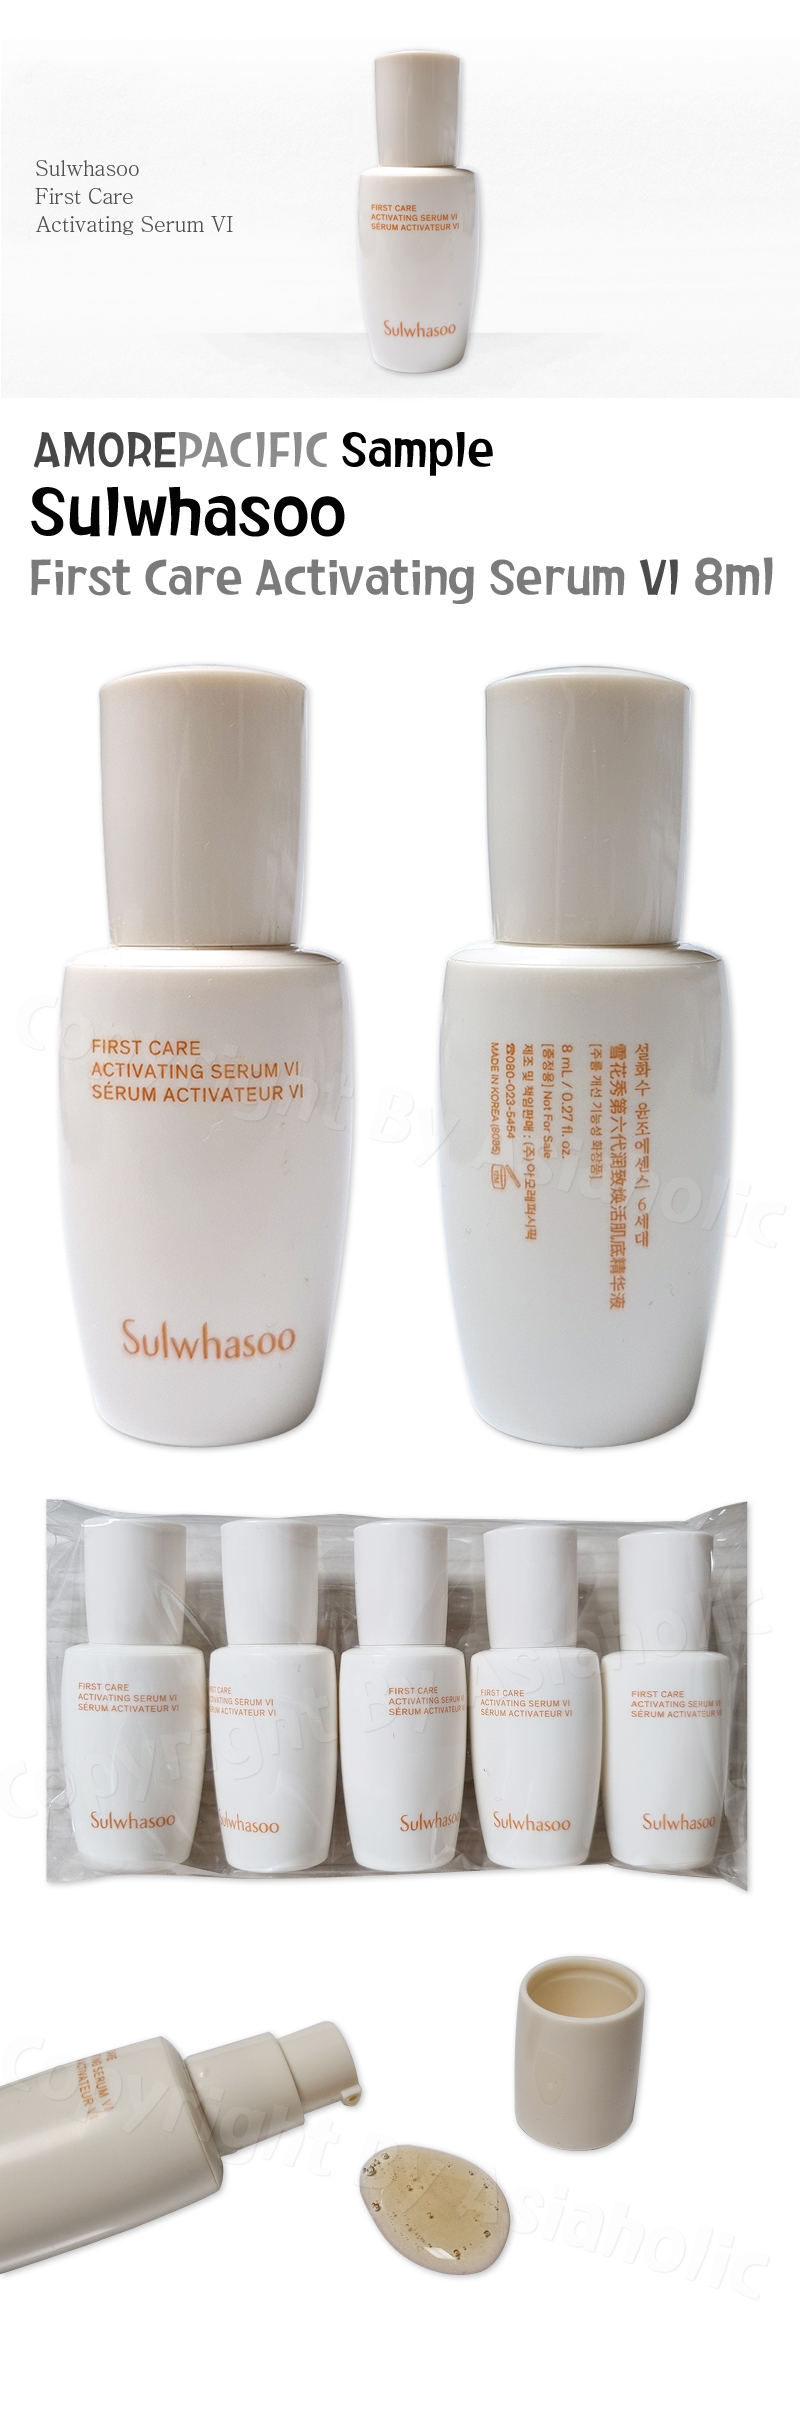 Sulwhasoo First Care Activating Serum VI 8ml x 15pcs (120ml) Sample Newest Version